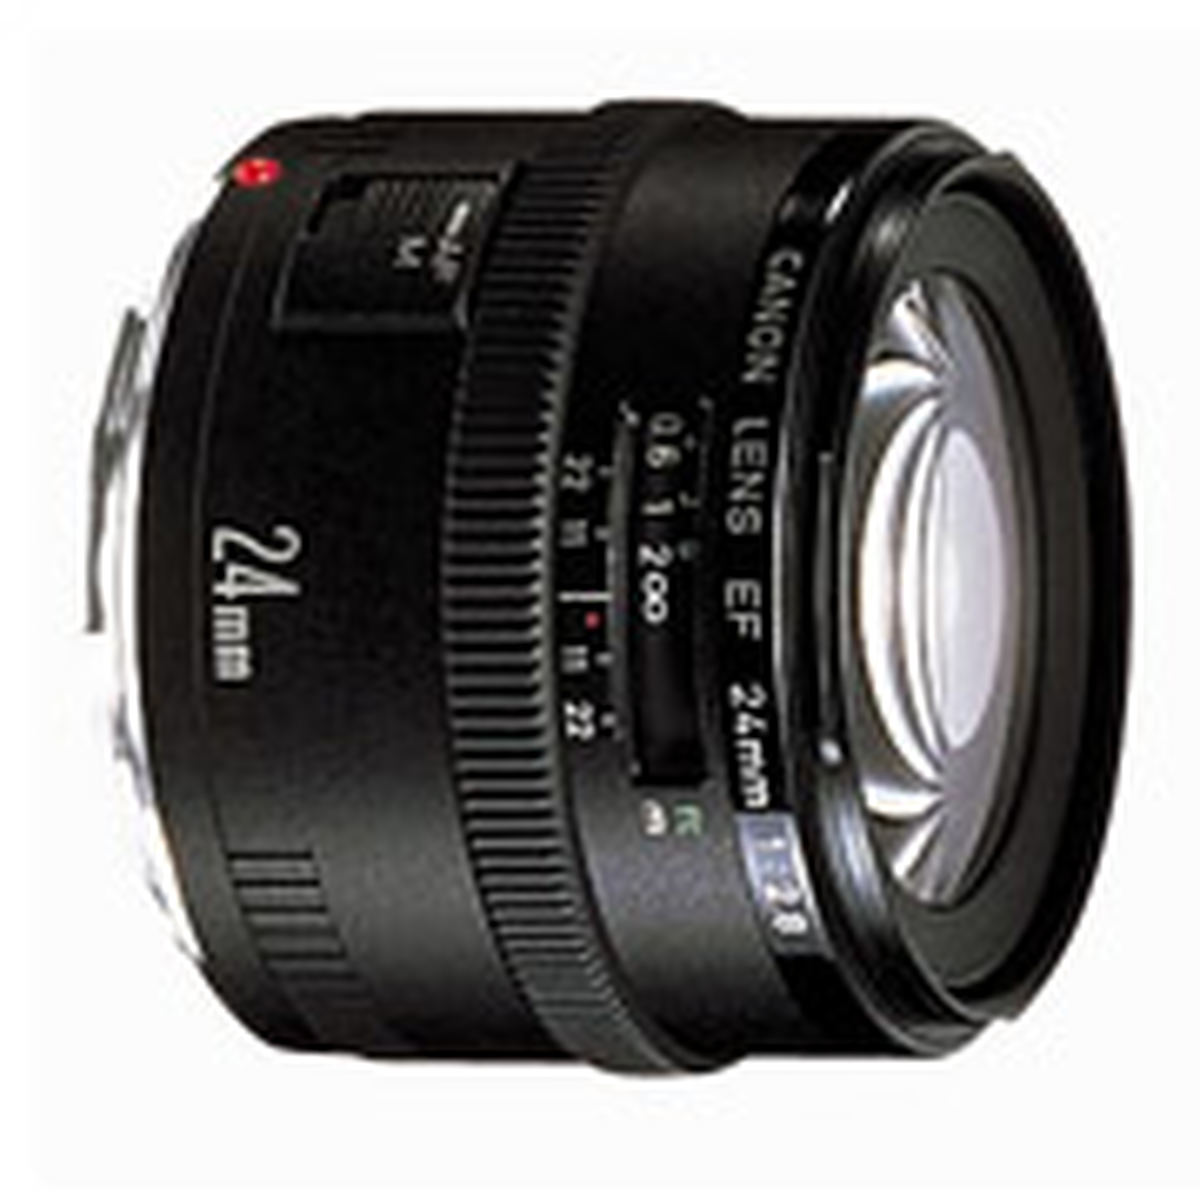 Canon EF 24mm f/2.8 : Specifications and Opinions | JuzaPhoto